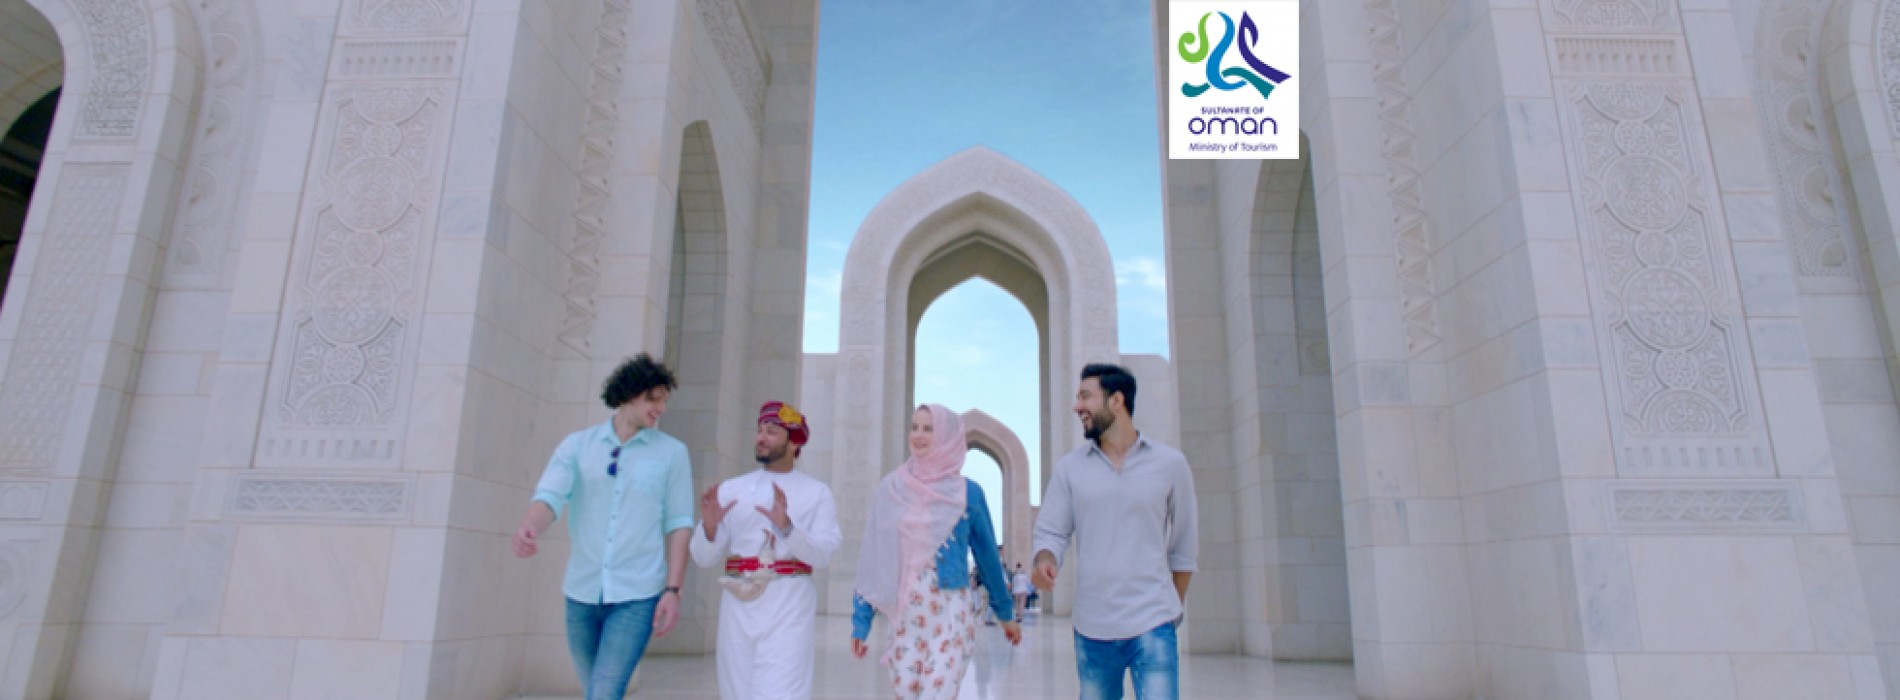 Oman Tourism launches global advertising campaign